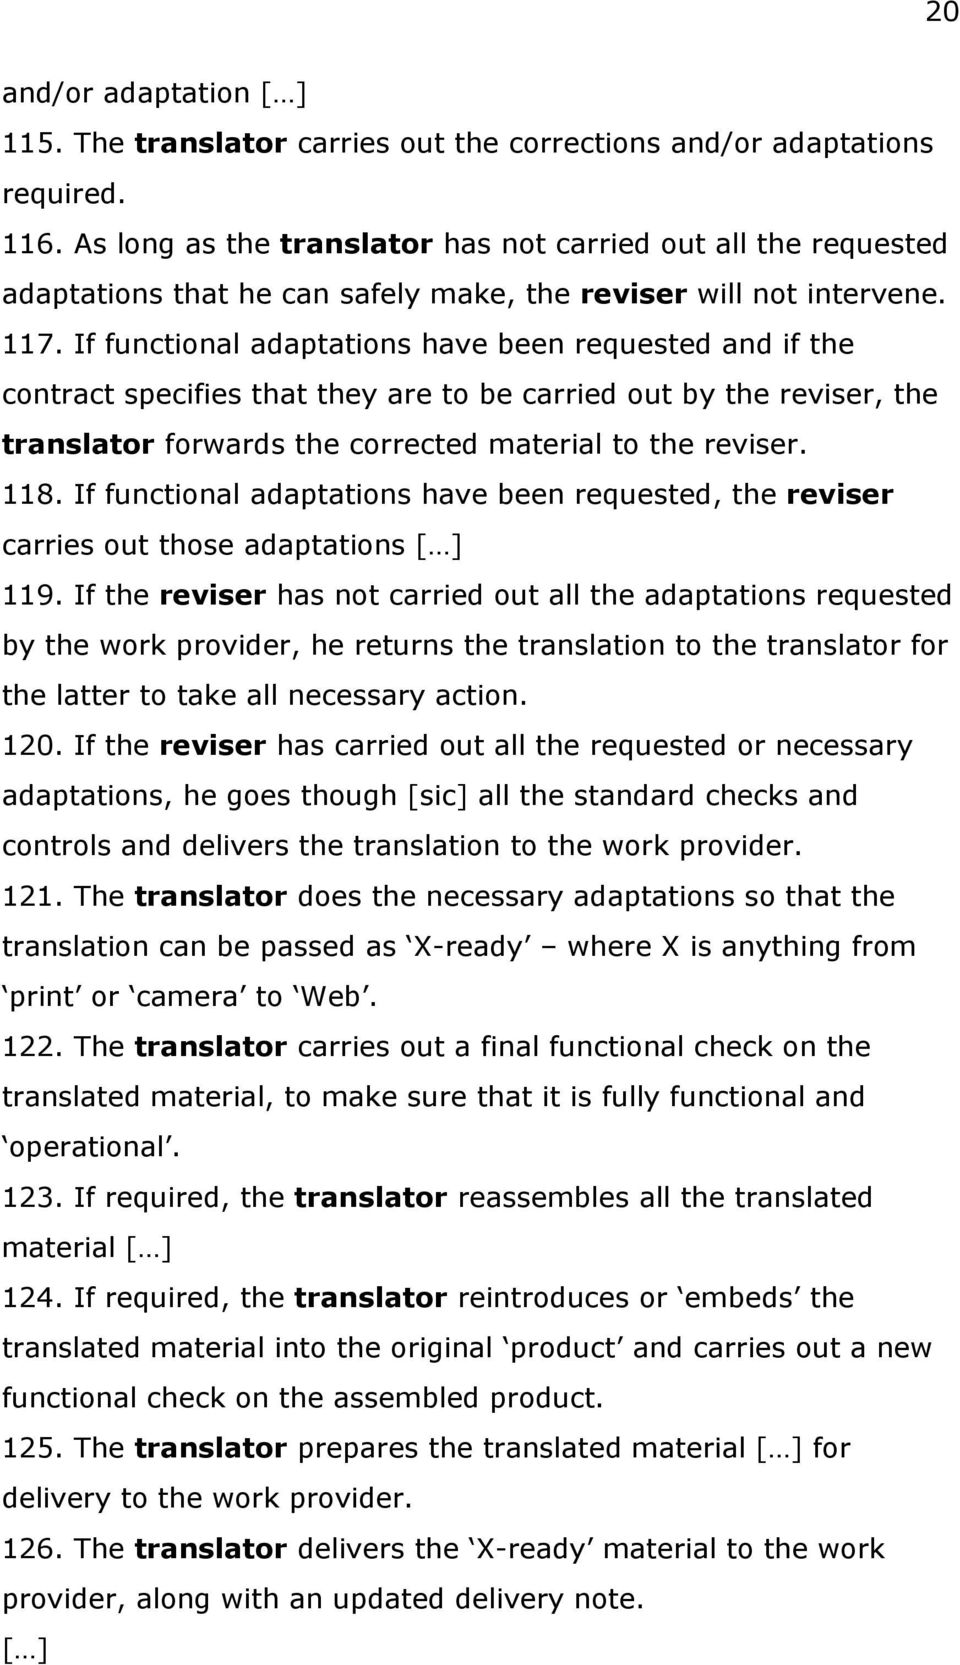 If functional adaptations have been requested and if the contract specifies that they are to be carried out by the reviser, the translator forwards the corrected material to the reviser. 118.